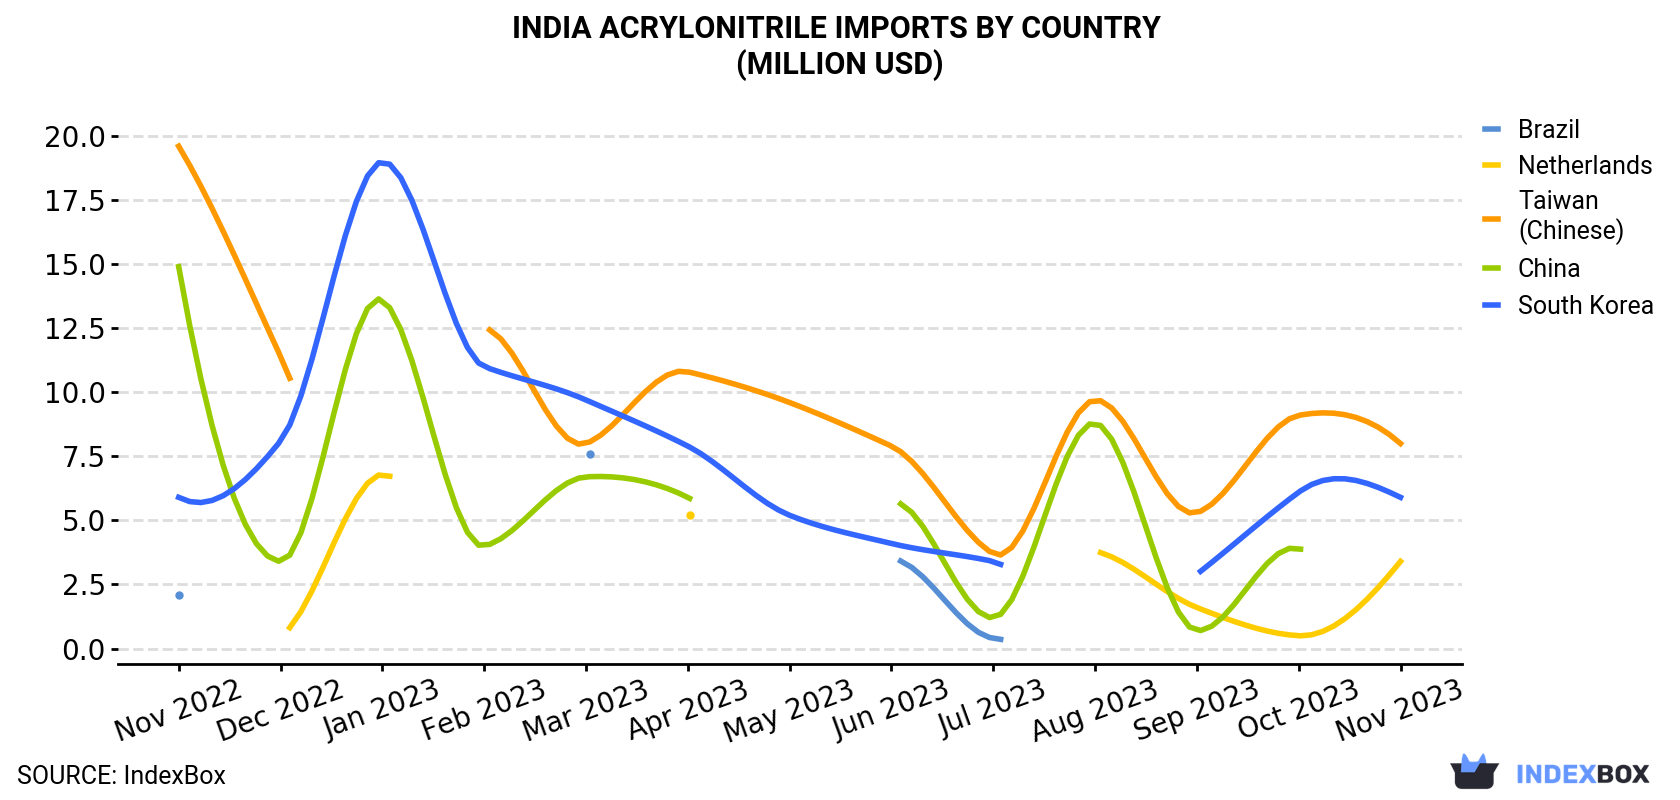 India Acrylonitrile Imports By Country (Million USD)